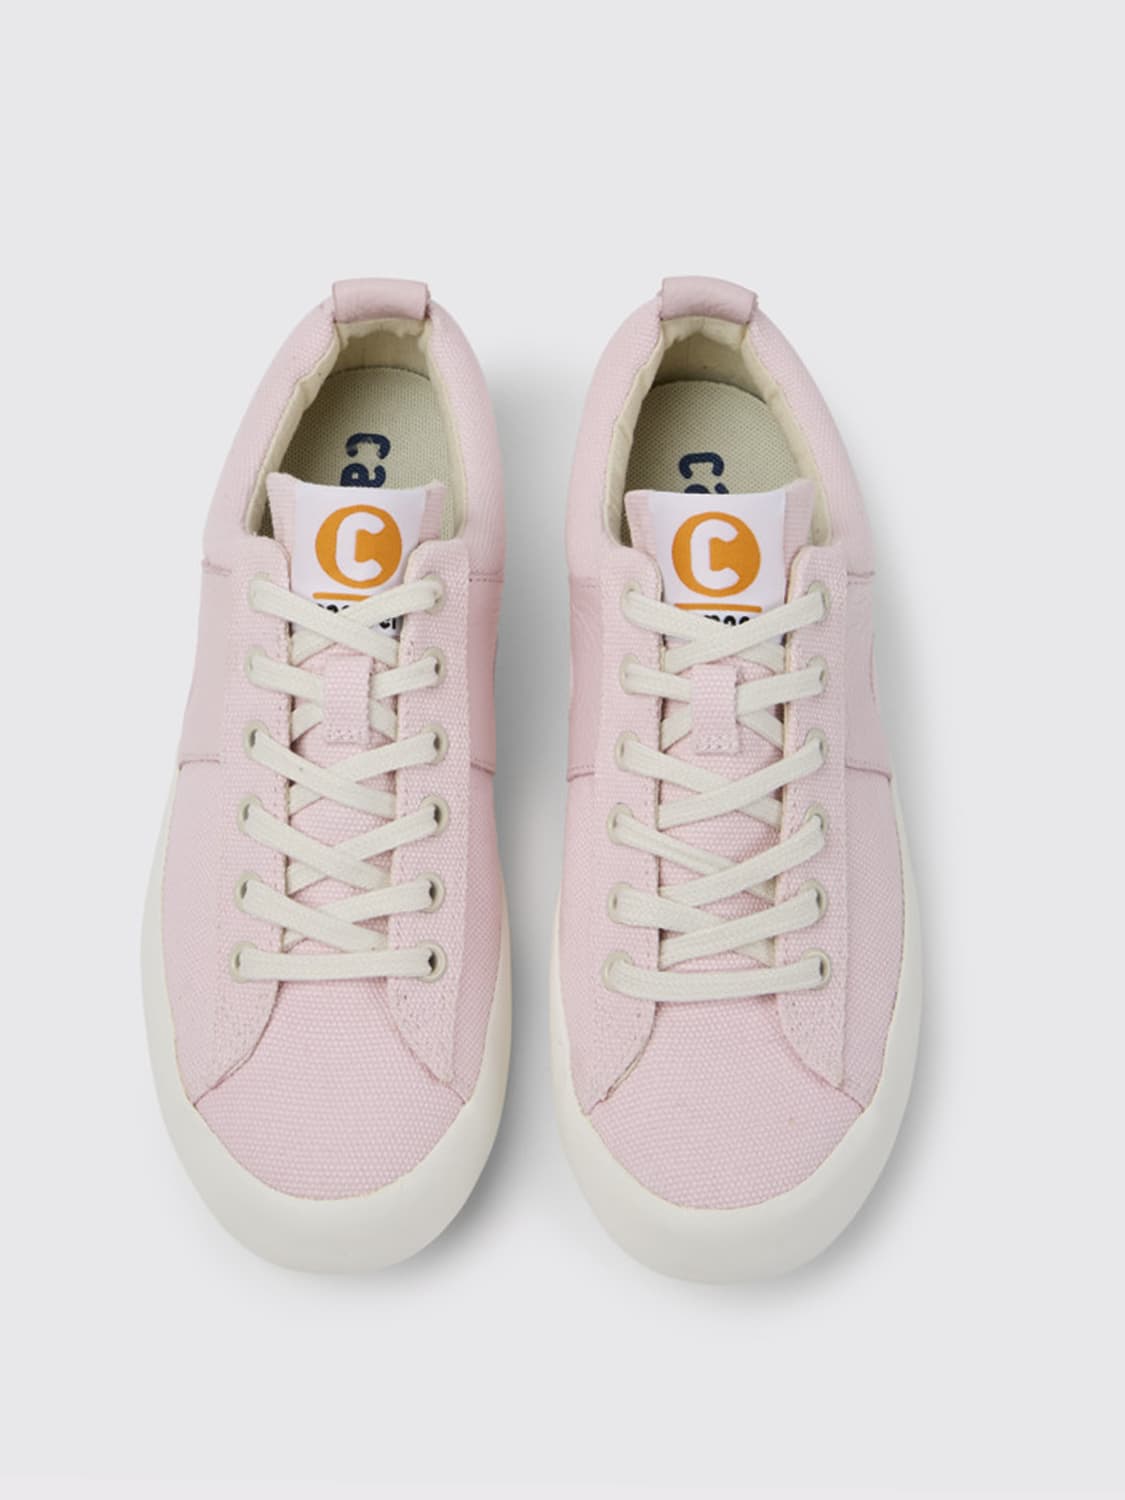 Camper Outlet: Imar sneakers in calfskin - Pink | sneakers K201207-007 IMAR on GIGLIO.COM